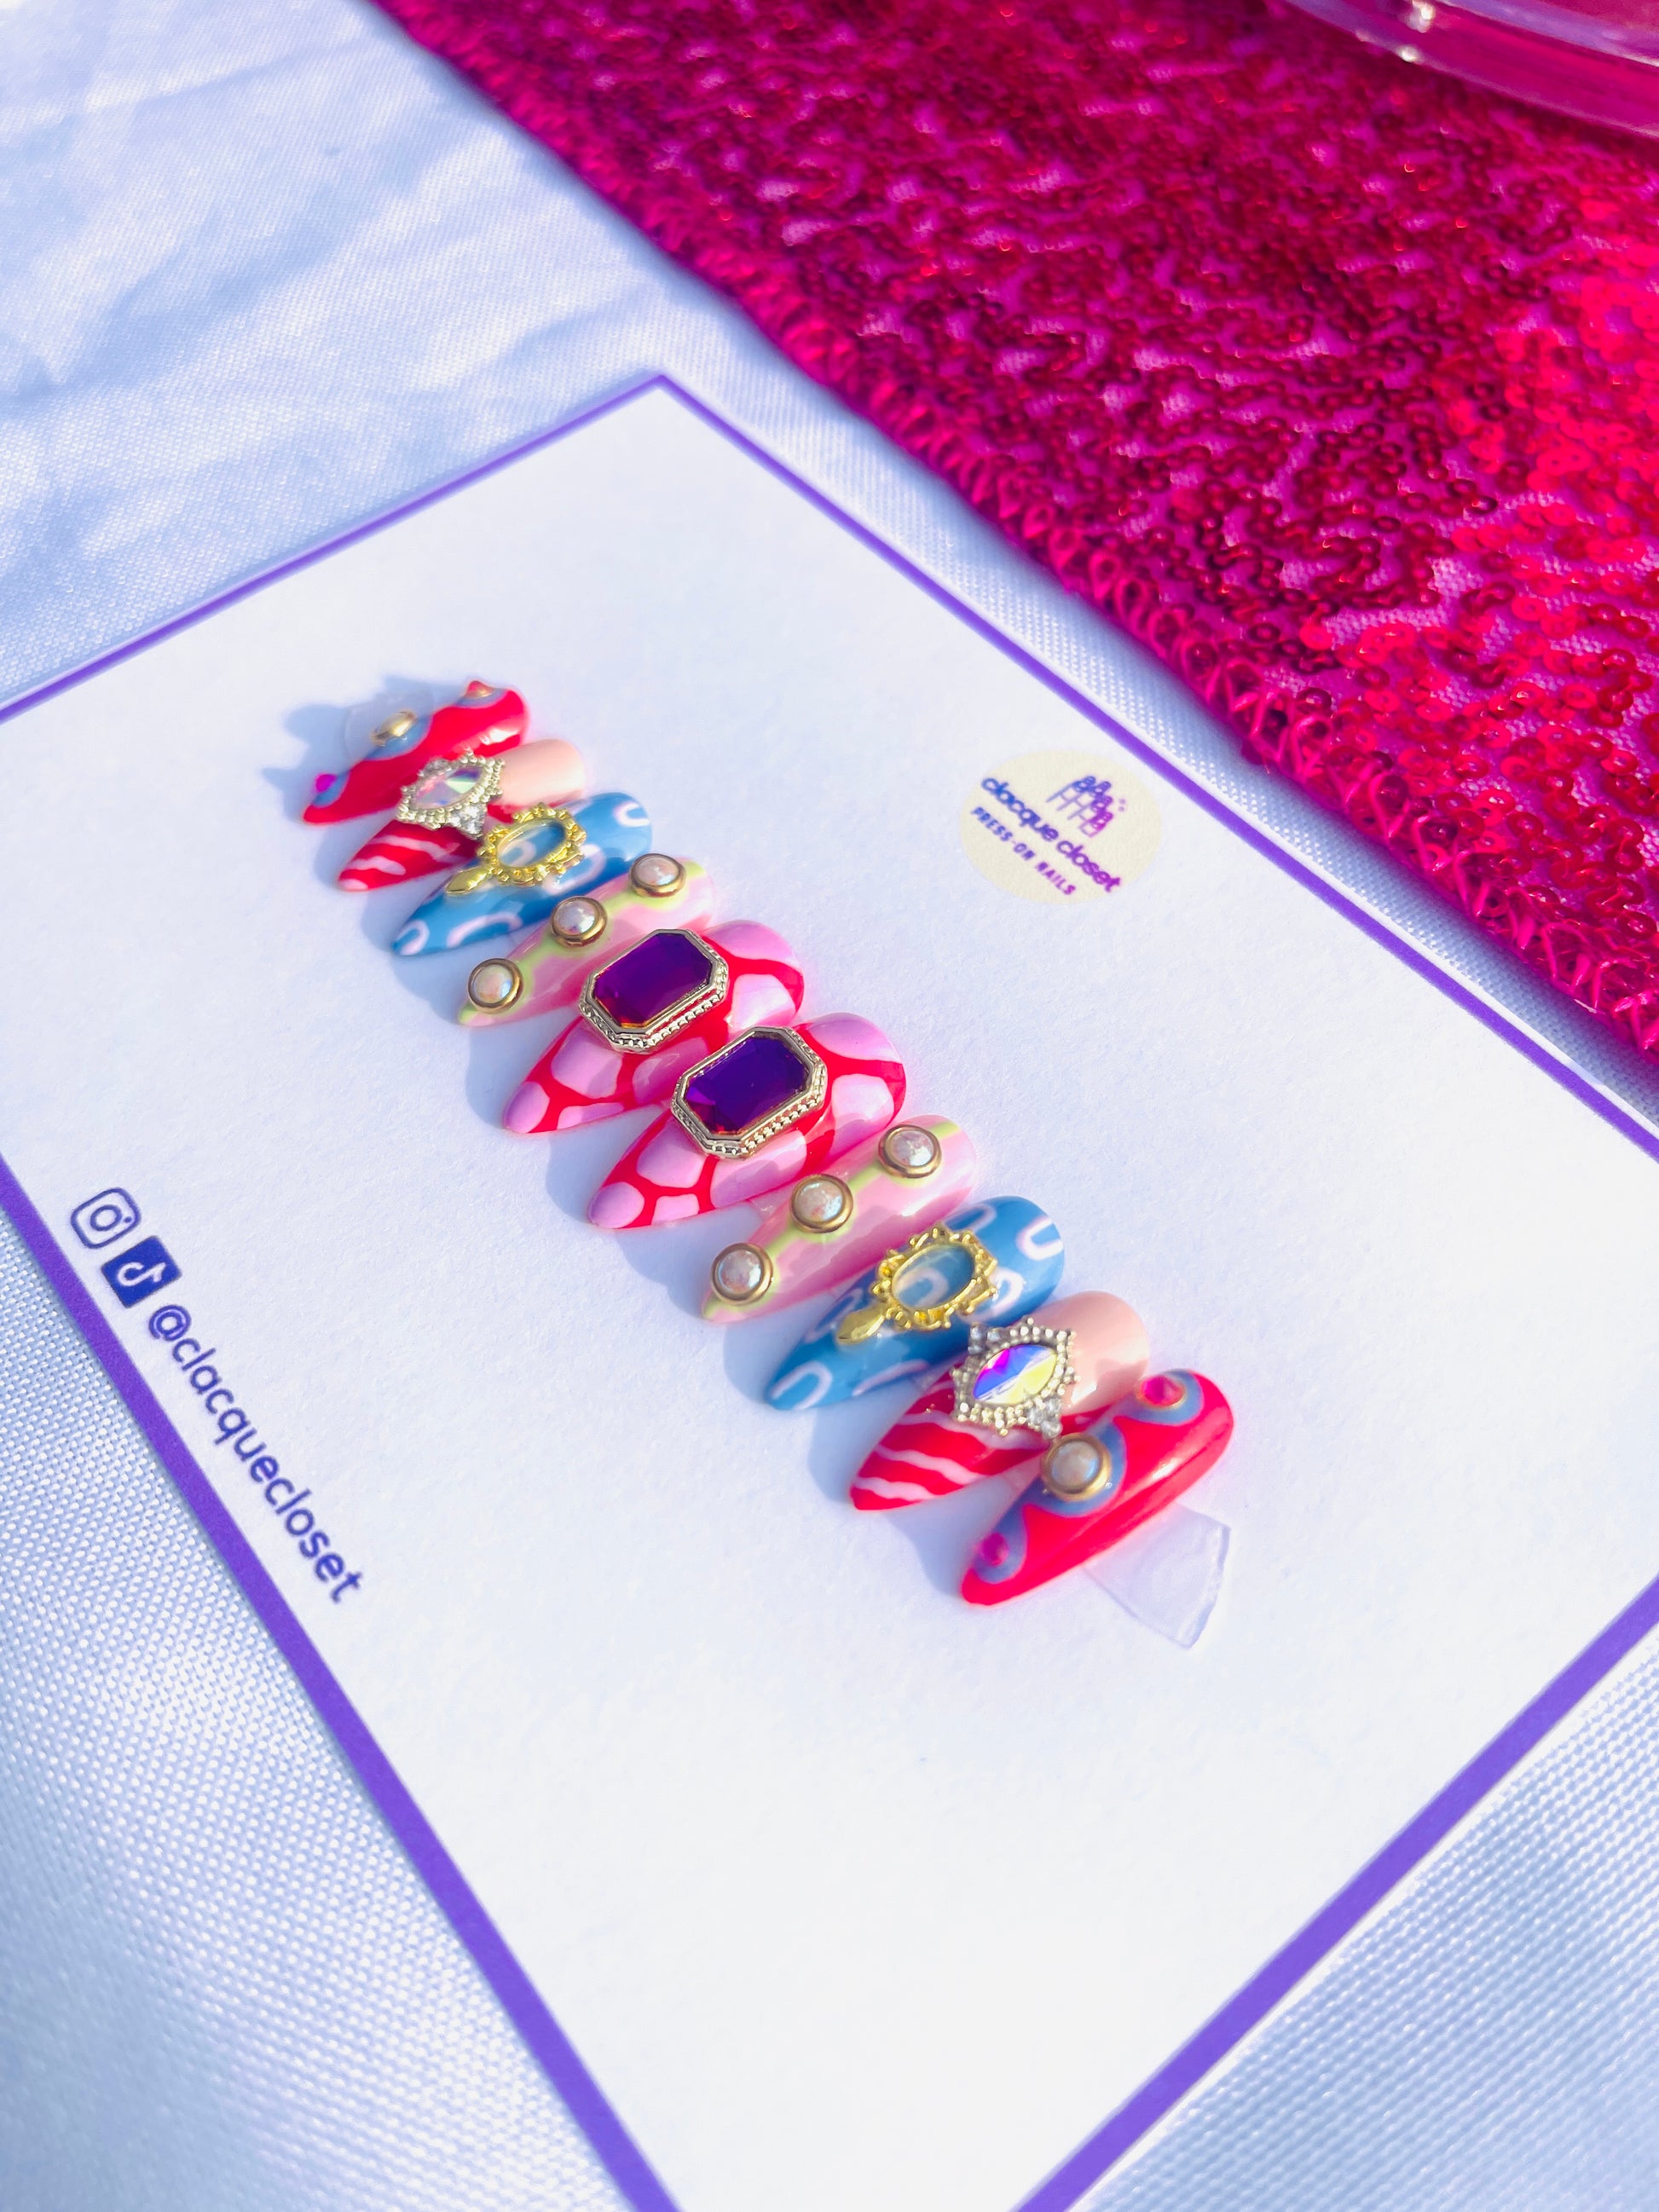 Medium-length stiletto nails featuring an extravagant set filled with various charms and abstract art designs, embodying a bold and artistic expression.